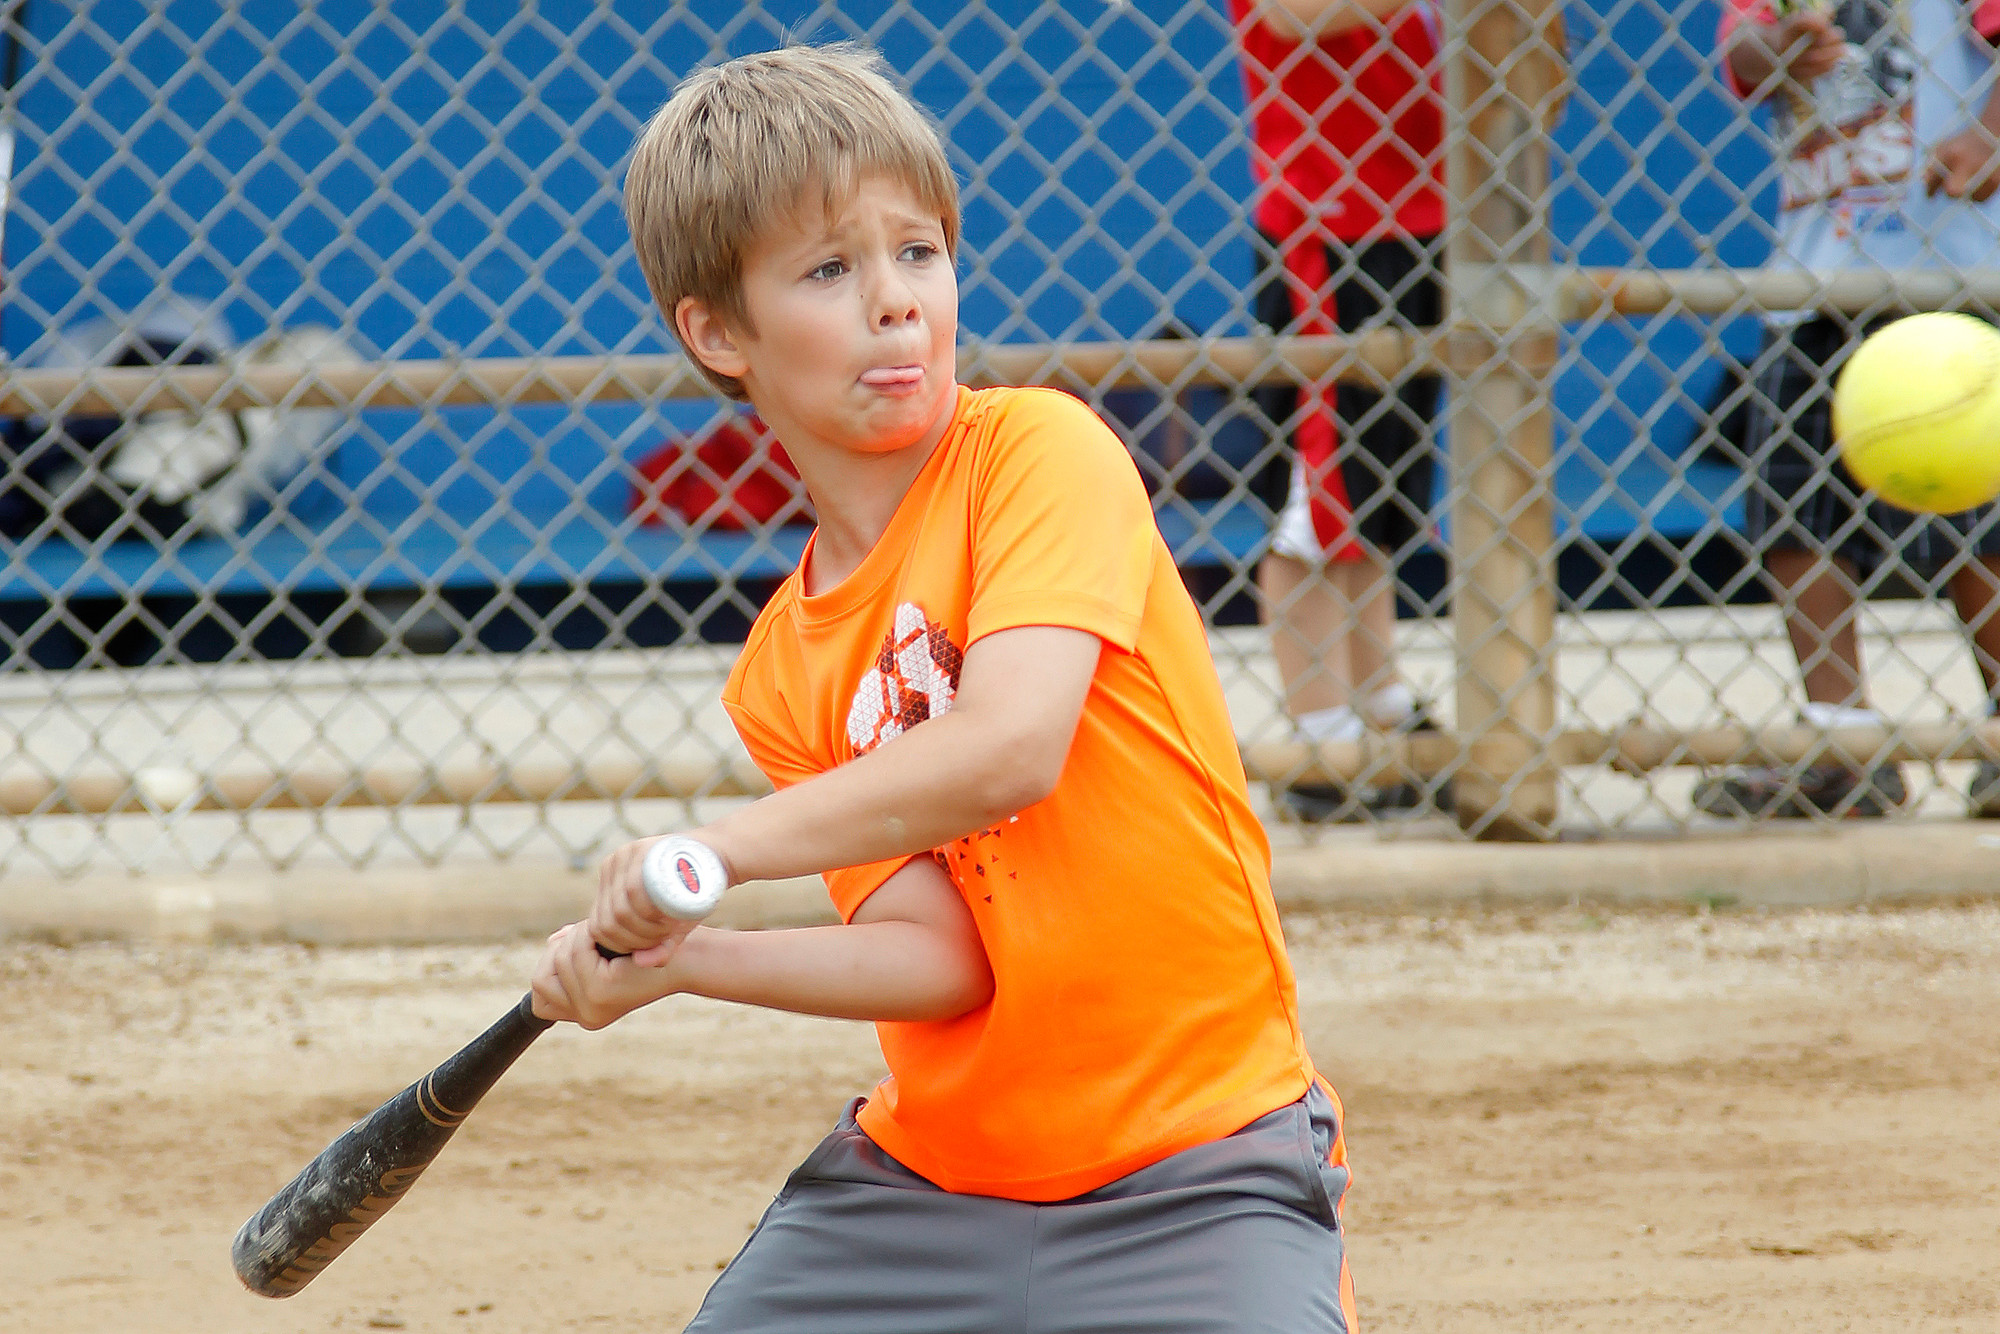 Giovanni Sienahorowitz, 7, zeroed in on the ball and took a hack at it as members of the LISSA tossed batting practice on July 16.